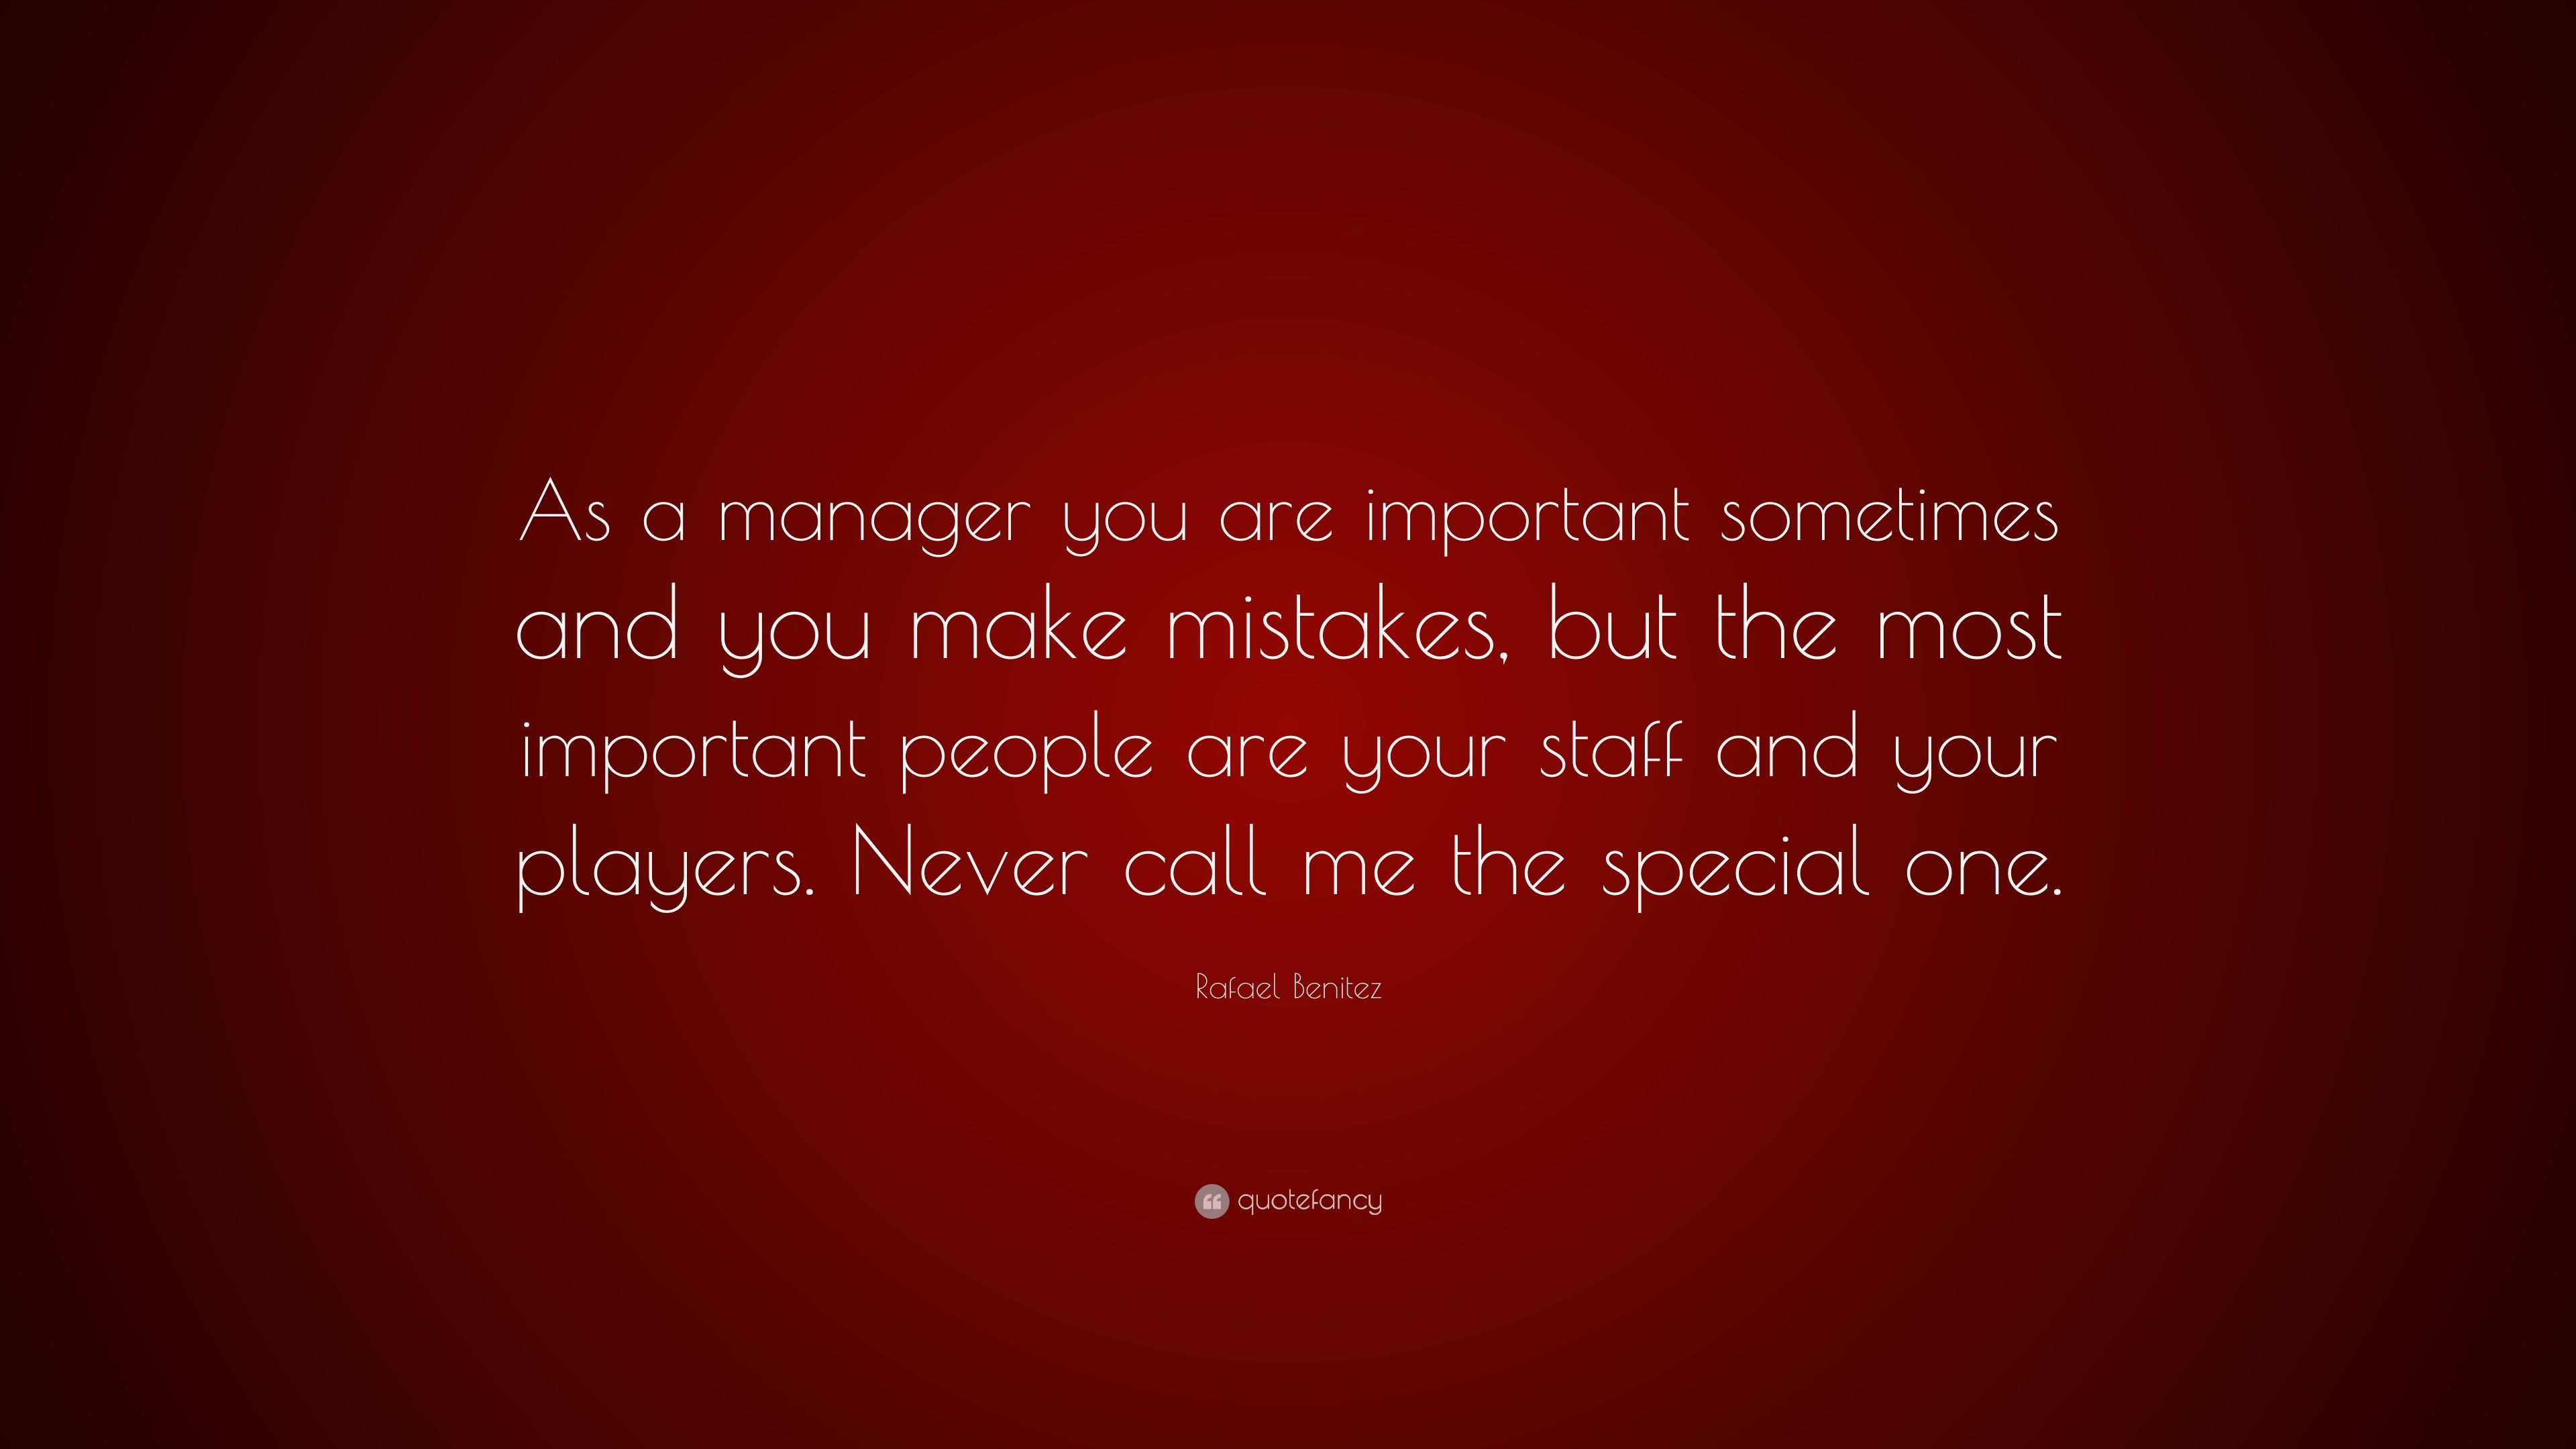 Rafael Benitez Quote: “As a manager you are important sometimes